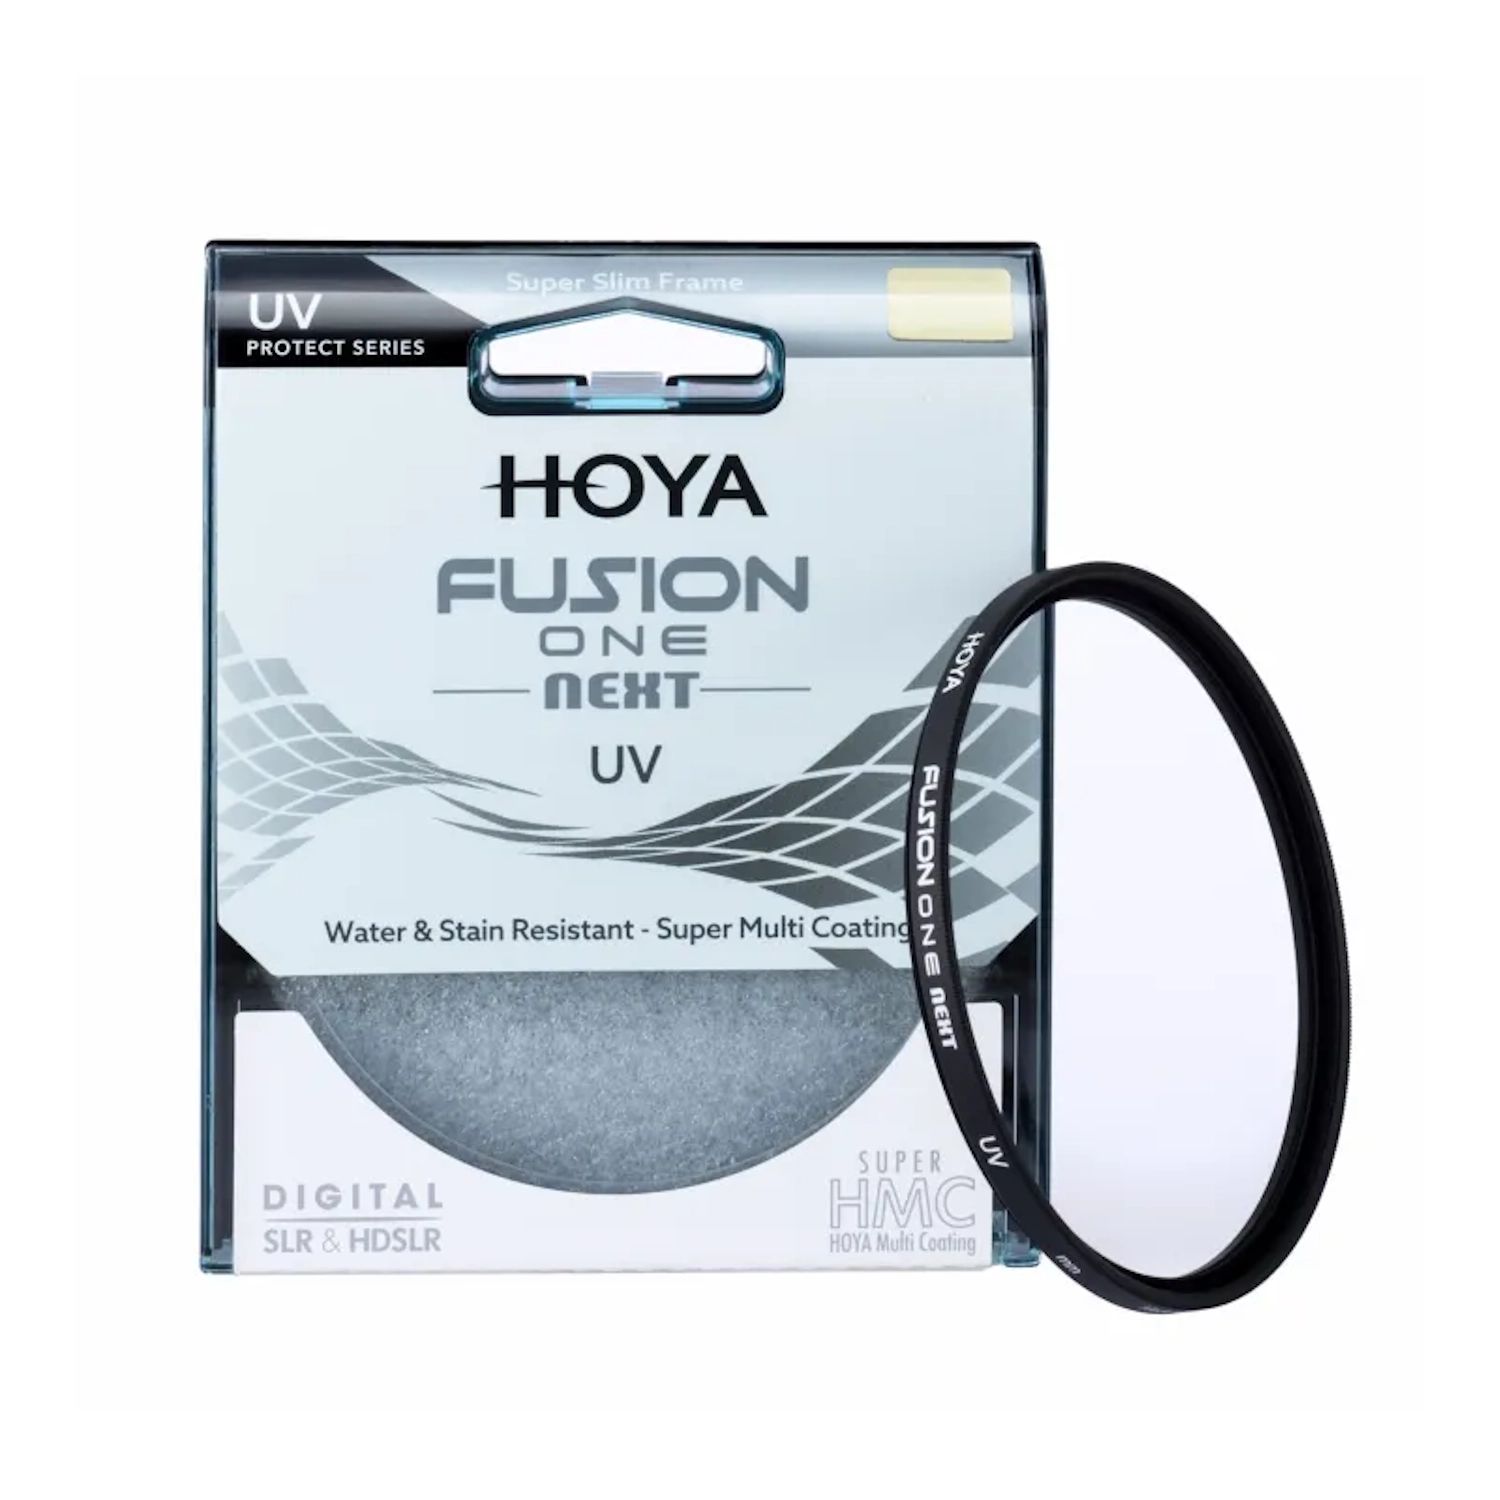 Hoya 40.5mm Fusion ONE Next UV Filter for Pentax 17